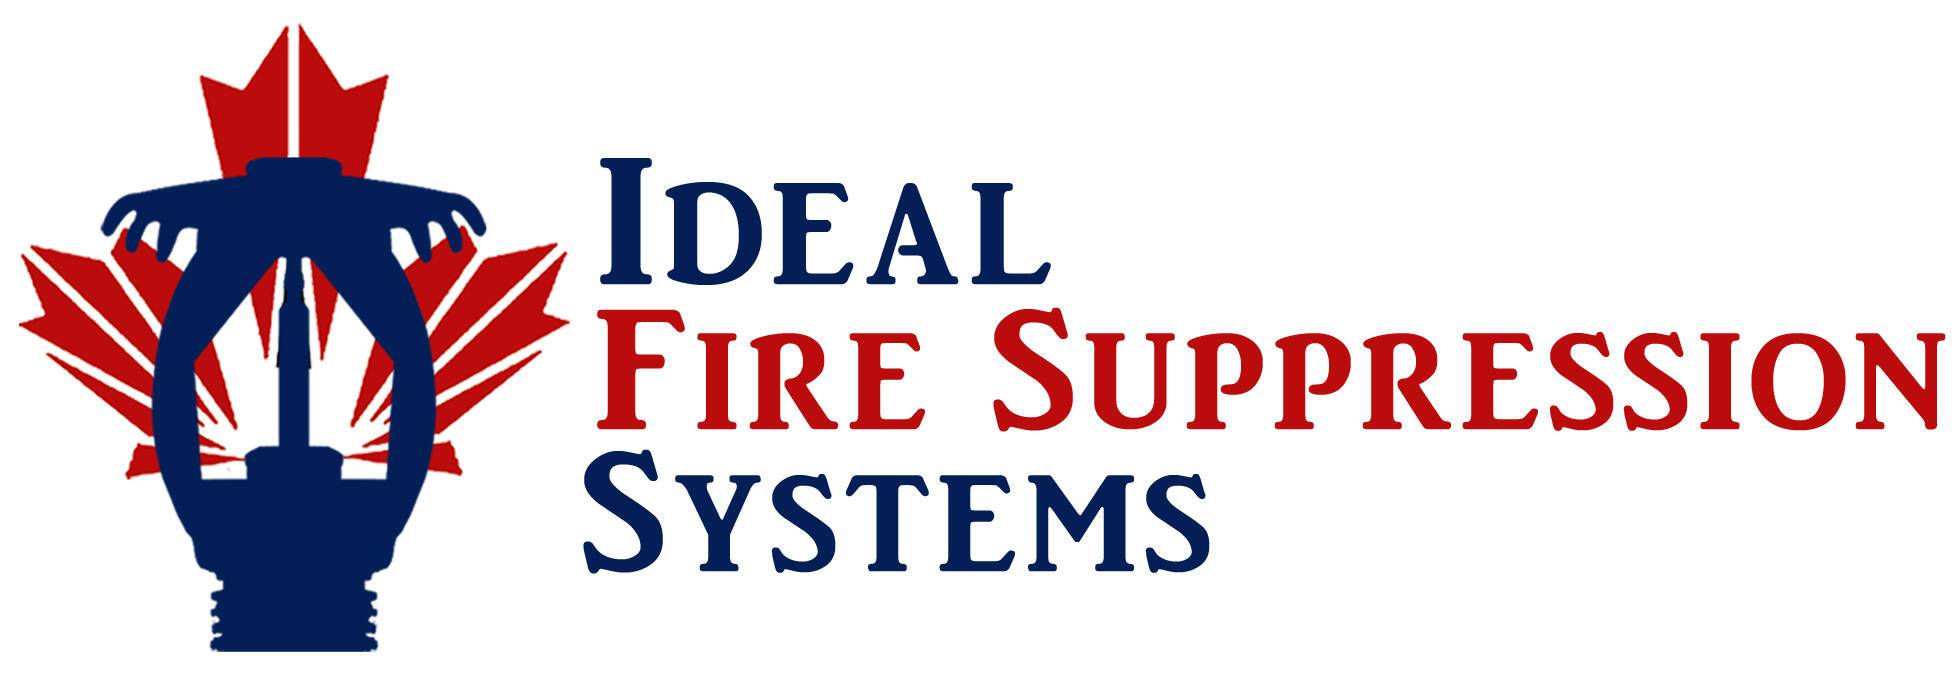 Ideal Fire Suppression Systems